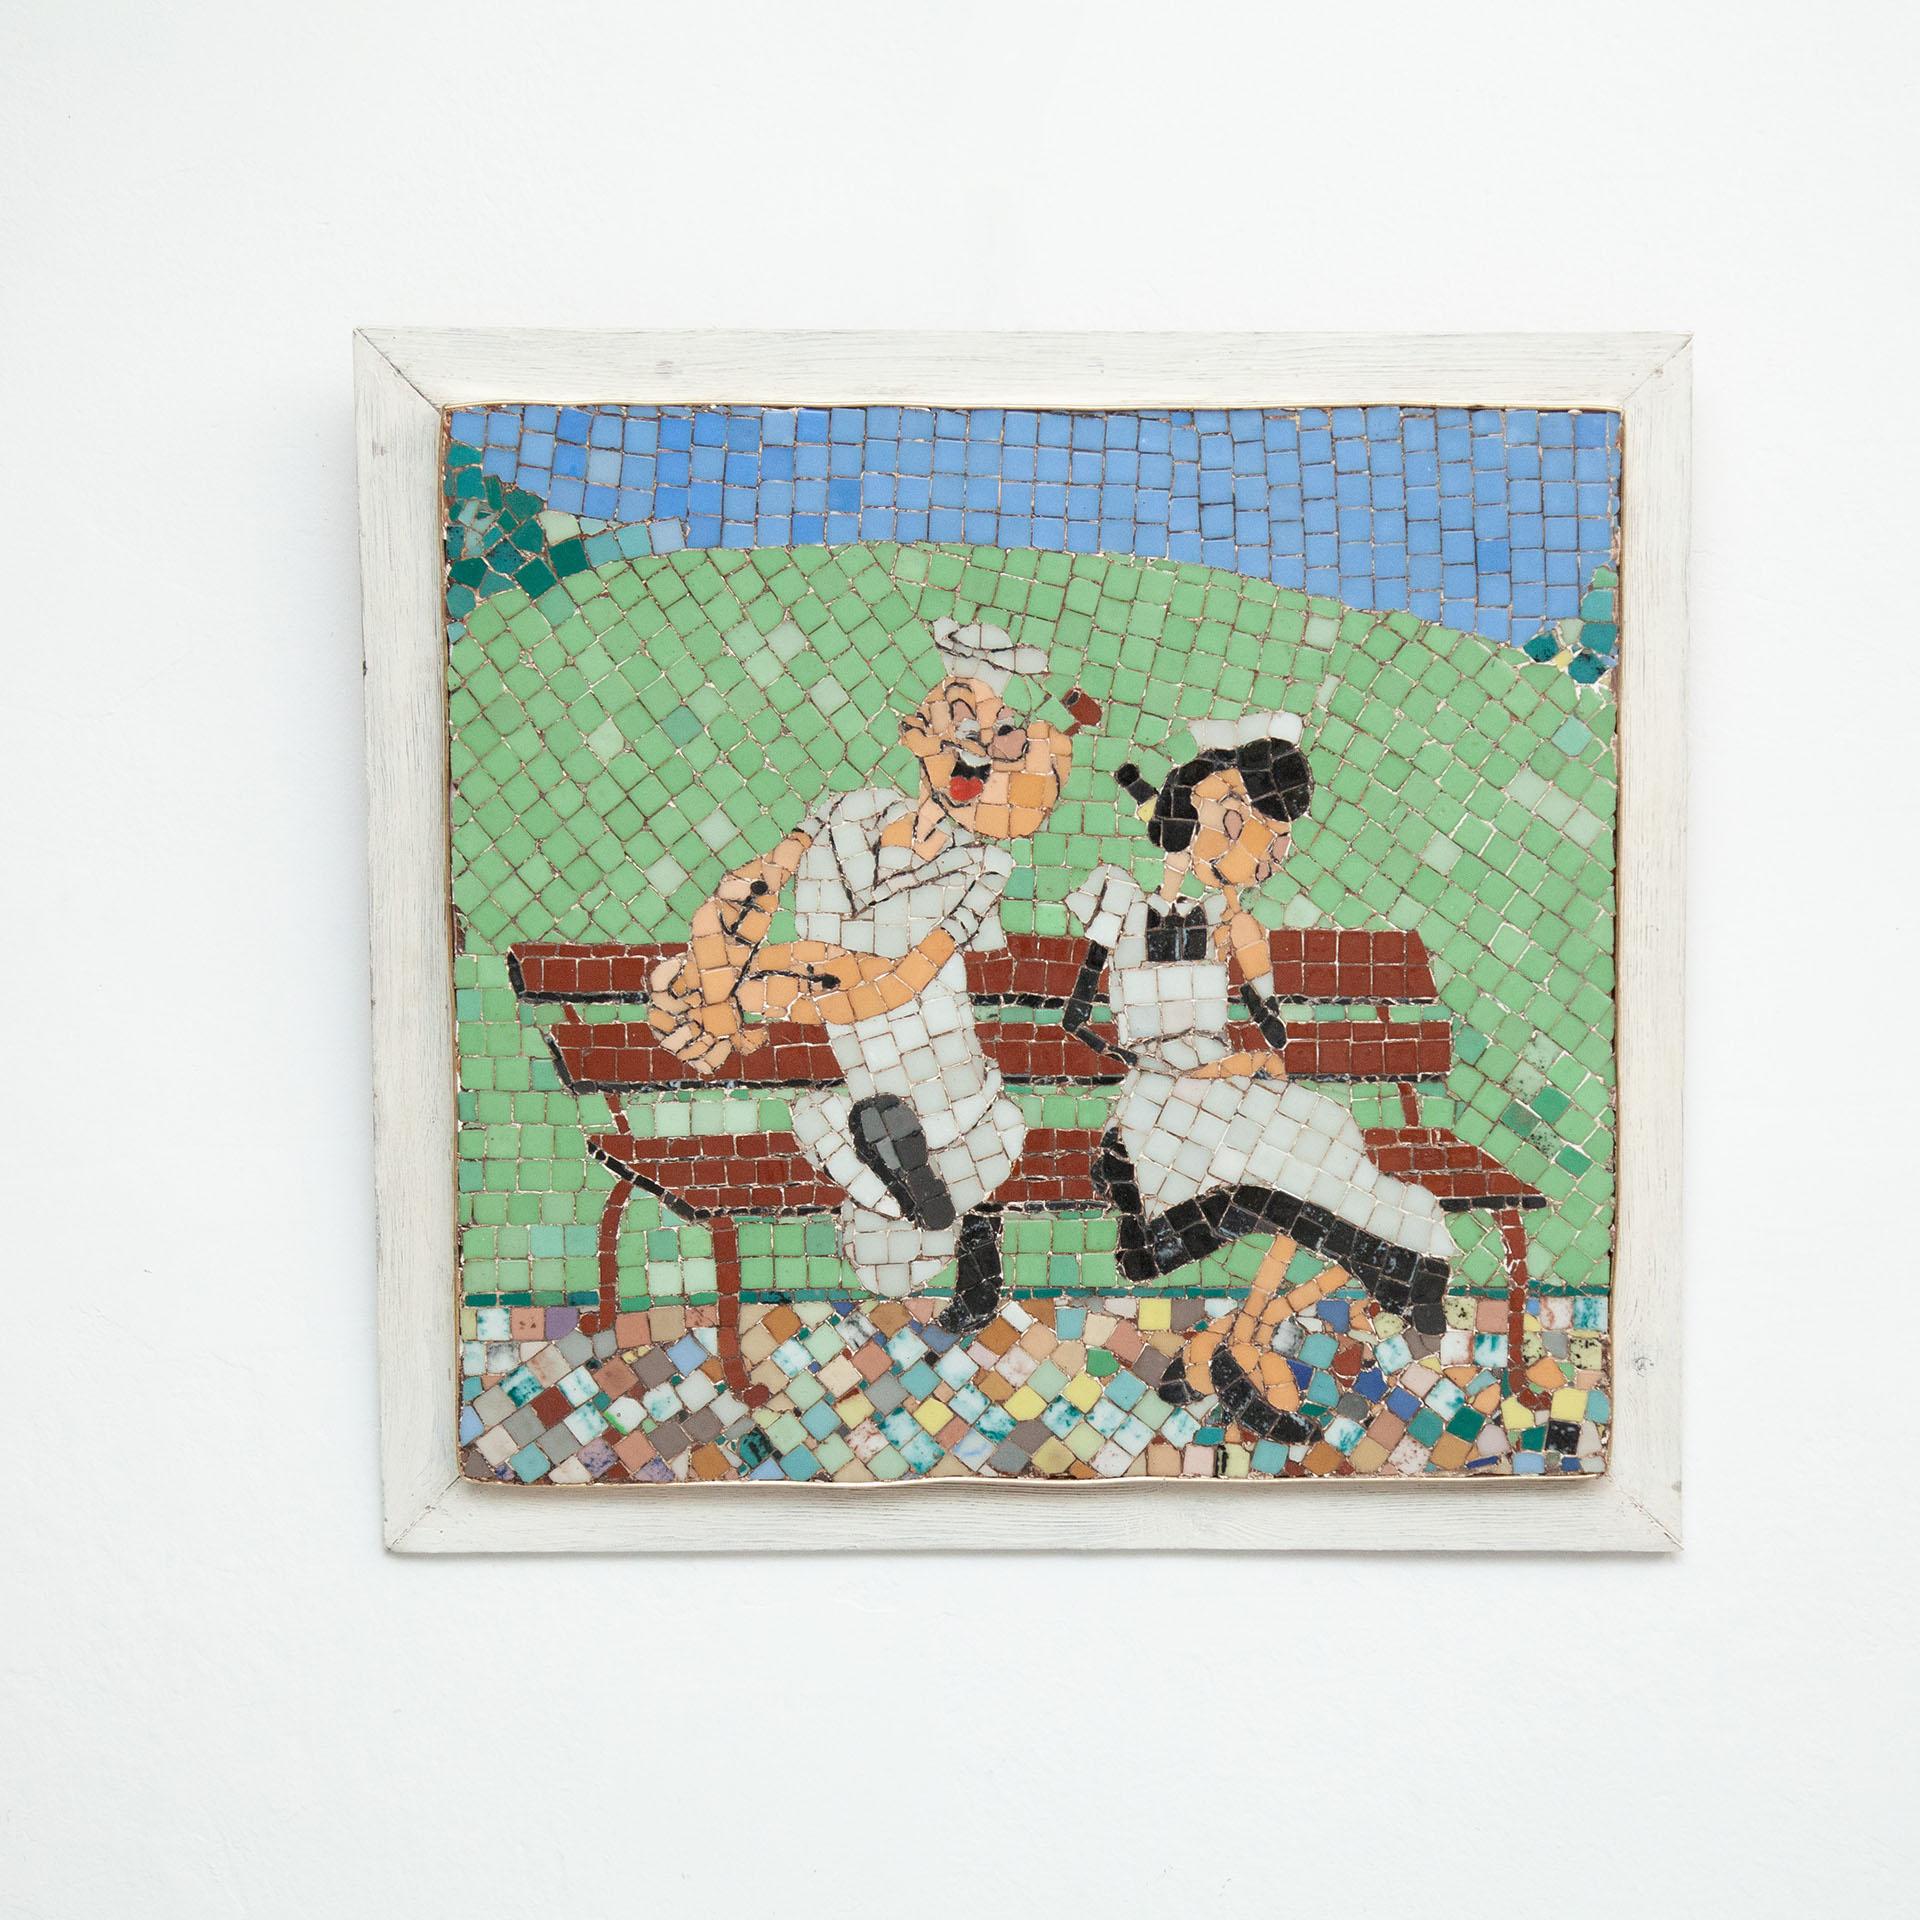 Mosaic Artwork Popeye and Olivia.
By unknown artist from France, circa 1970.

In original condition, with minor wear consistent with age and use, preserving a beautiful patina.

Material:
Creamic
Wood

Dimensions:
D cm x W cm x H cm.